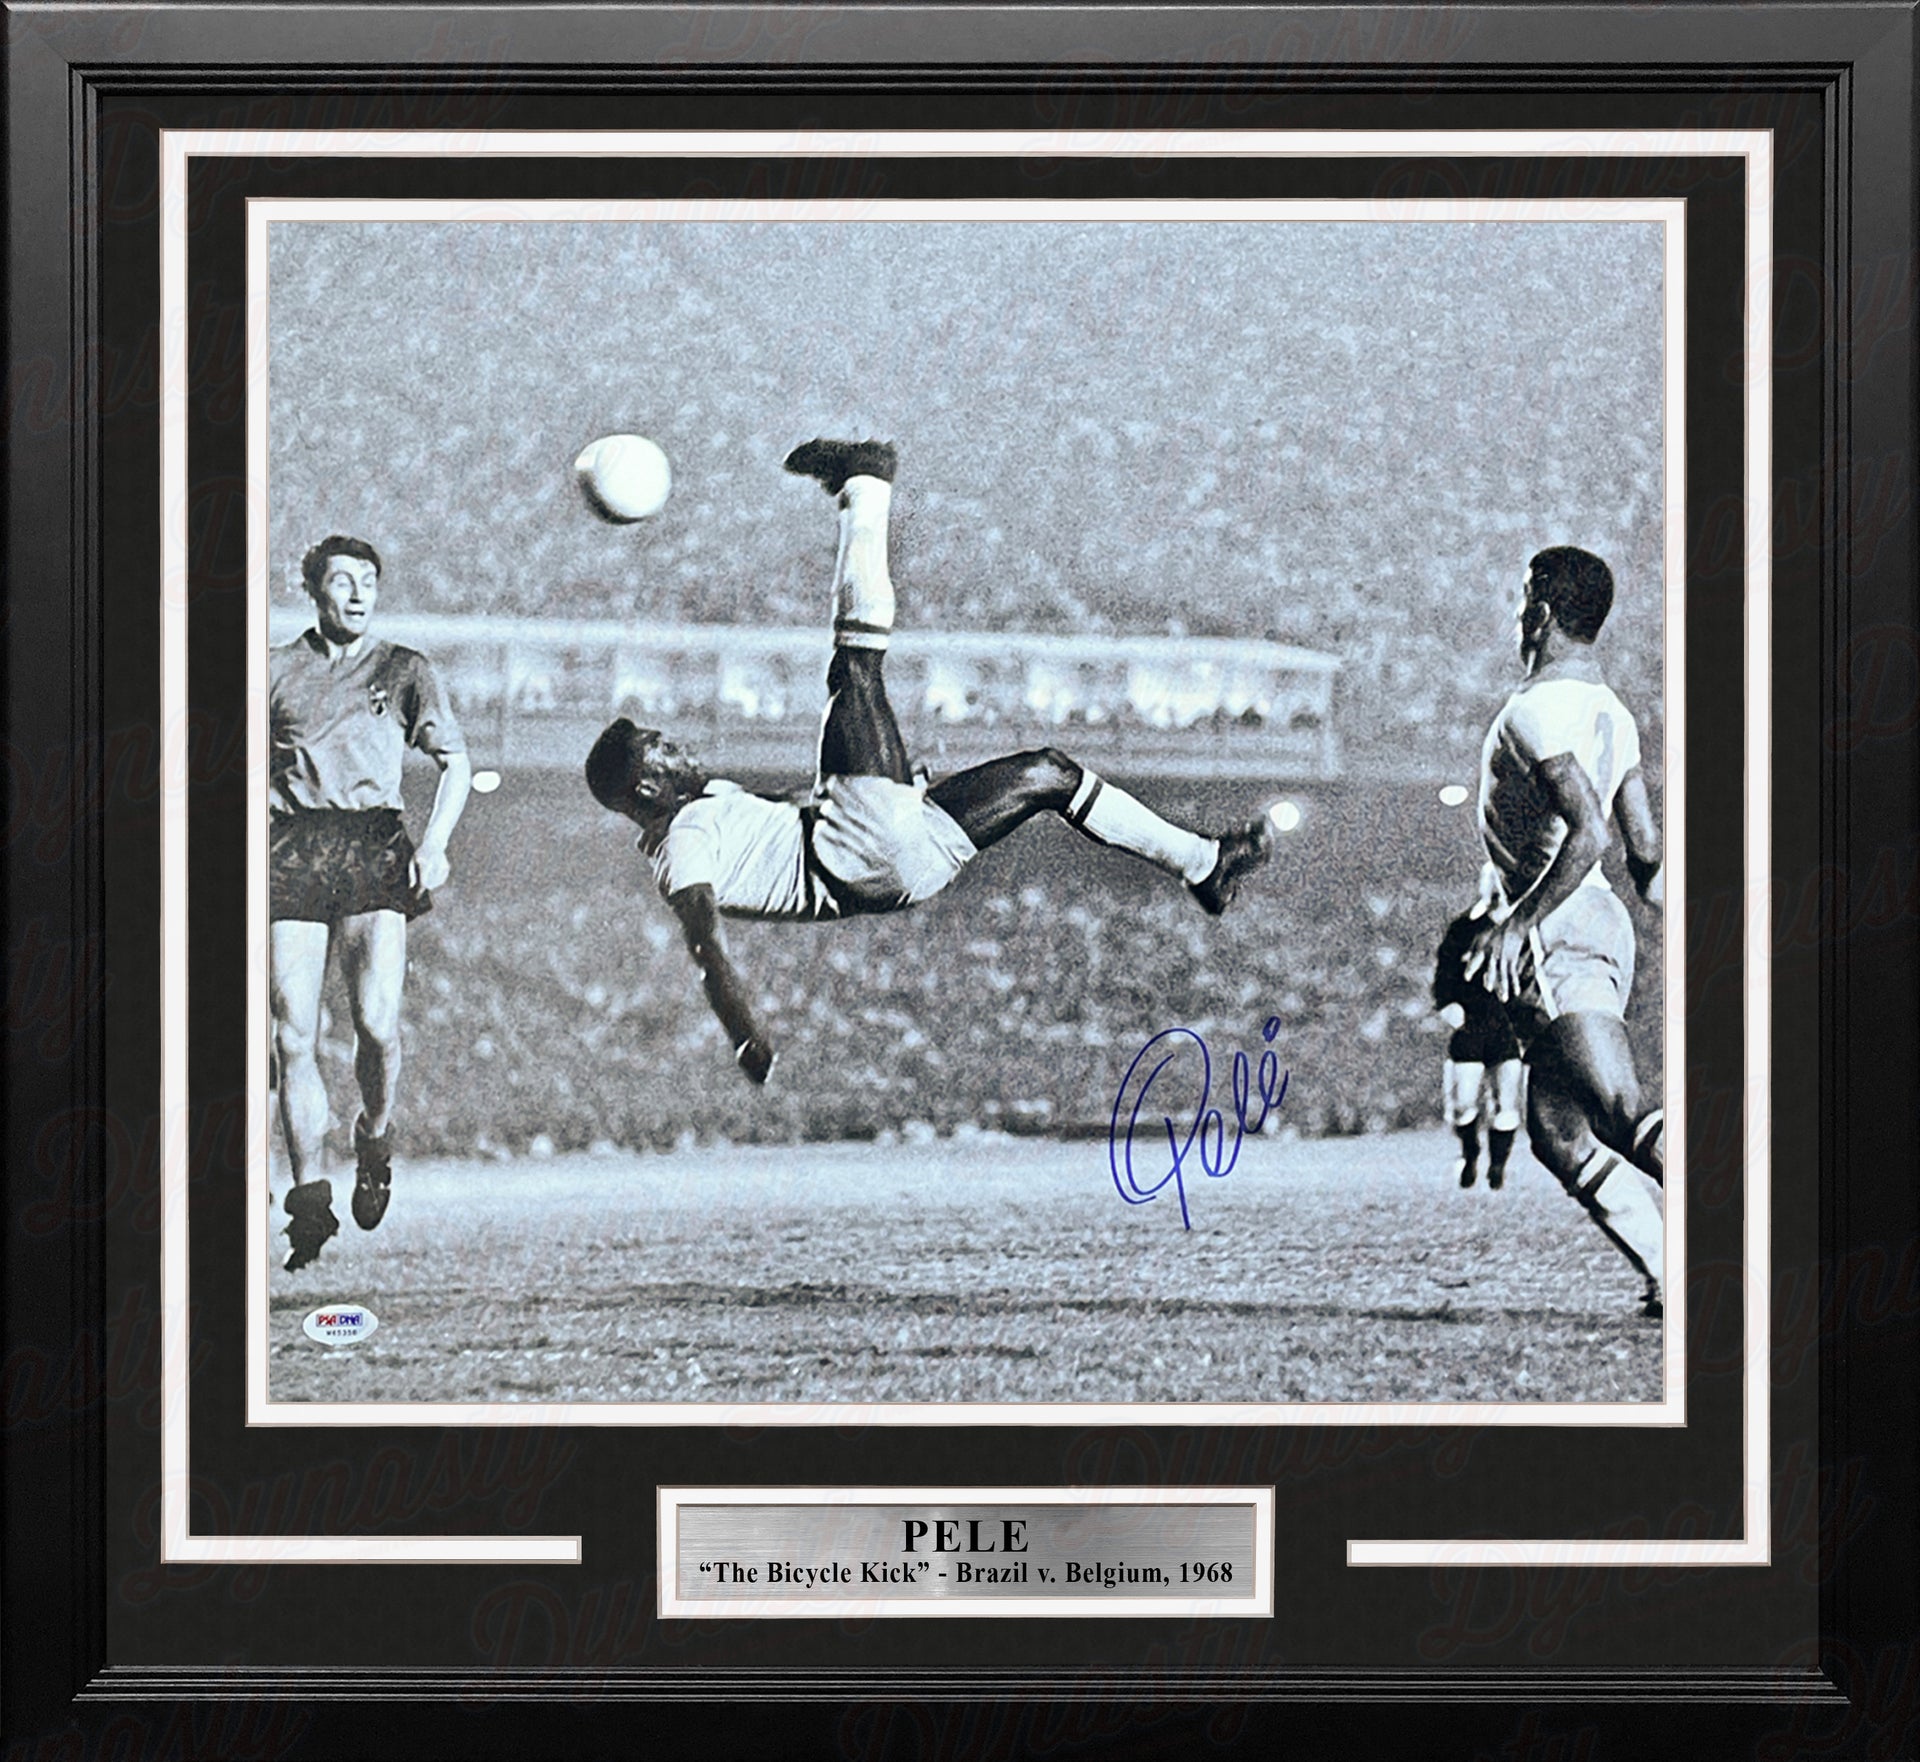 Pele Bicycle Kick, Brazil v. Belgium Autographed Soccer 16" x 20" Framed and Matted Photo - Dynasty Sports & Framing 